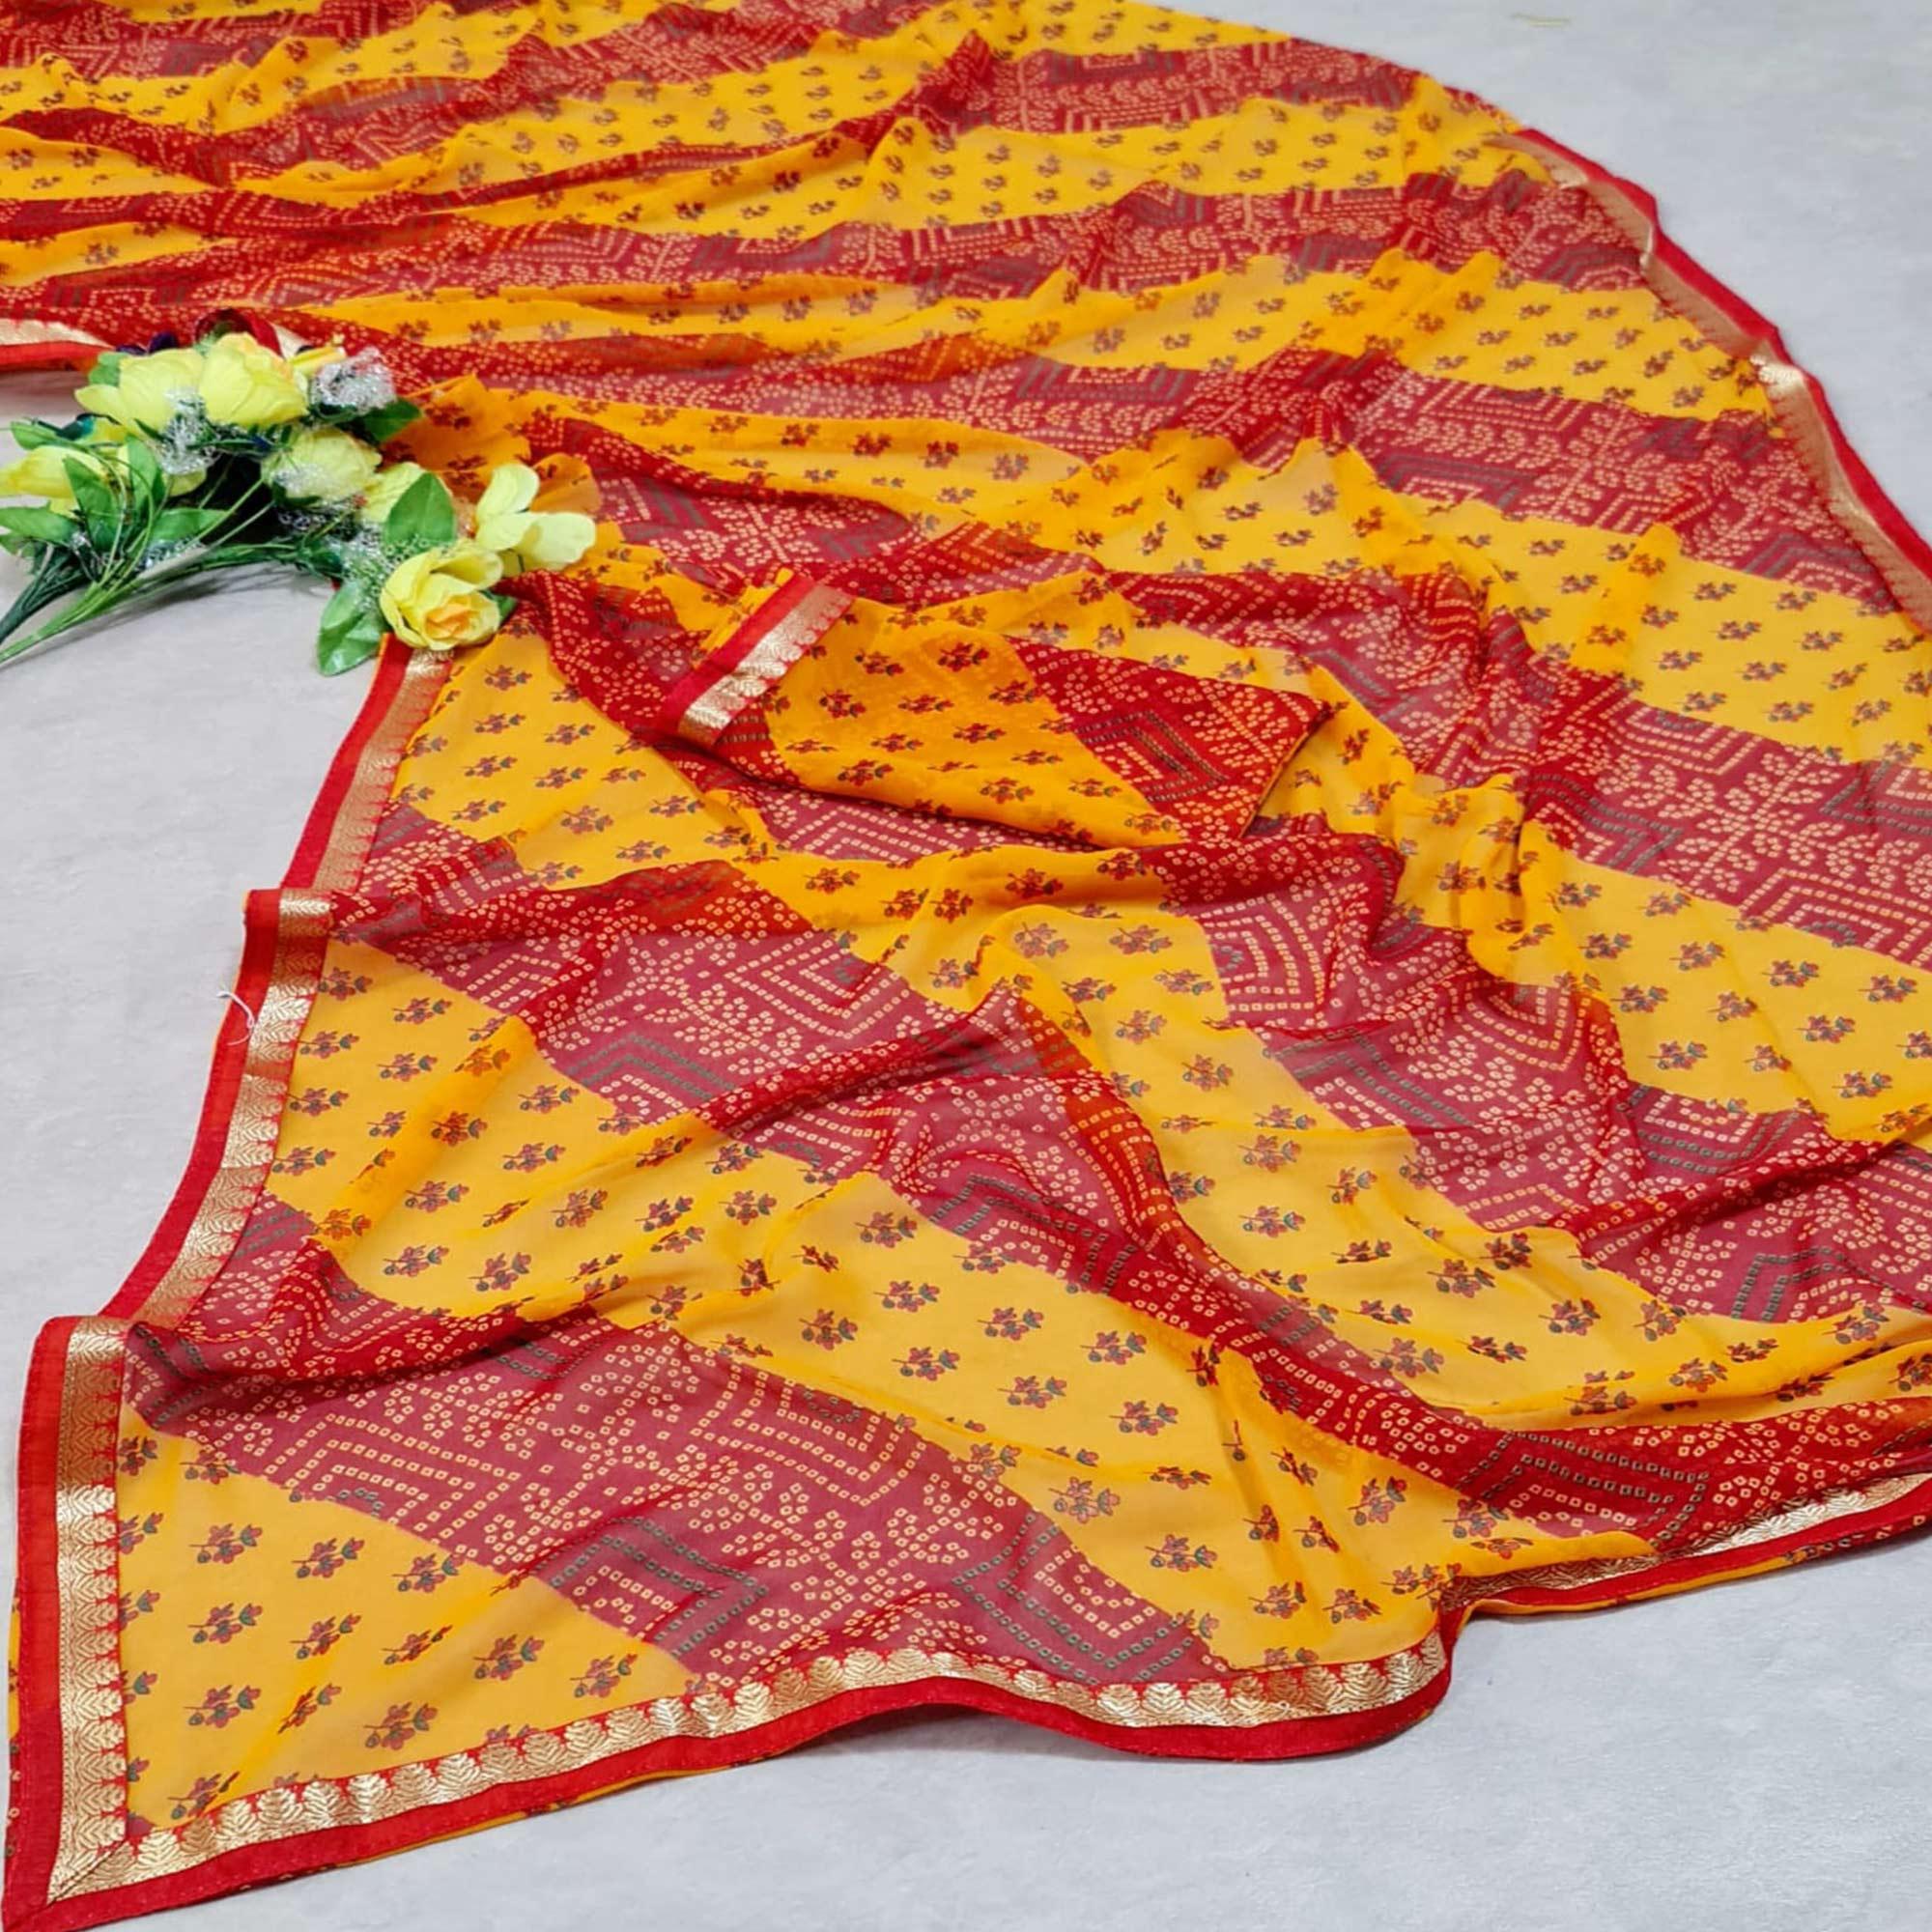 Red-Yellow Casual Wear Printed Georgette Saree With Lace Border - Peachmode